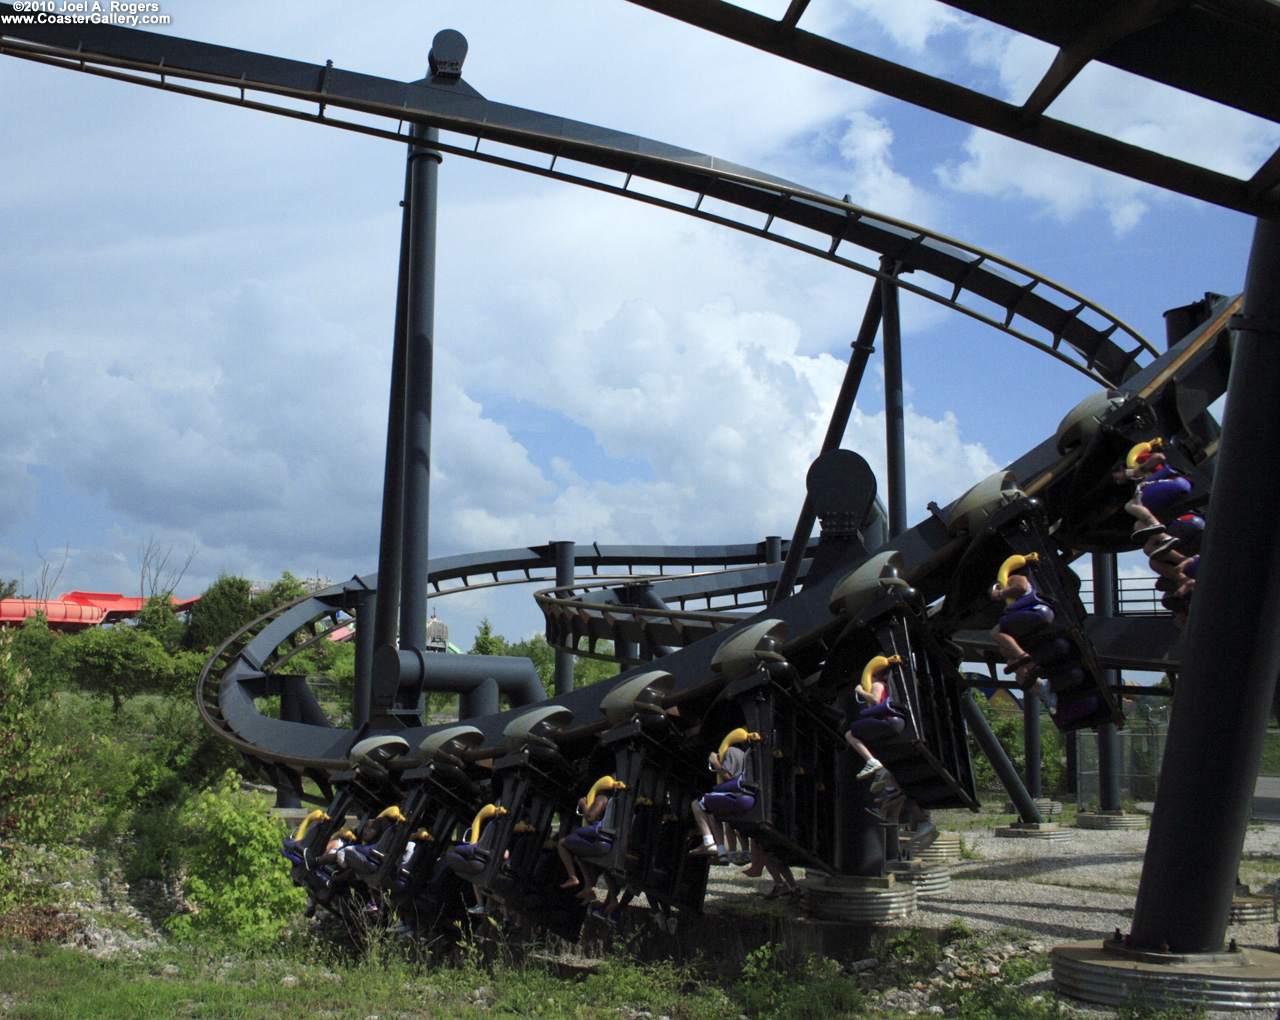 Batman the Ride. An inverted roller coaster coming very close to the ground!